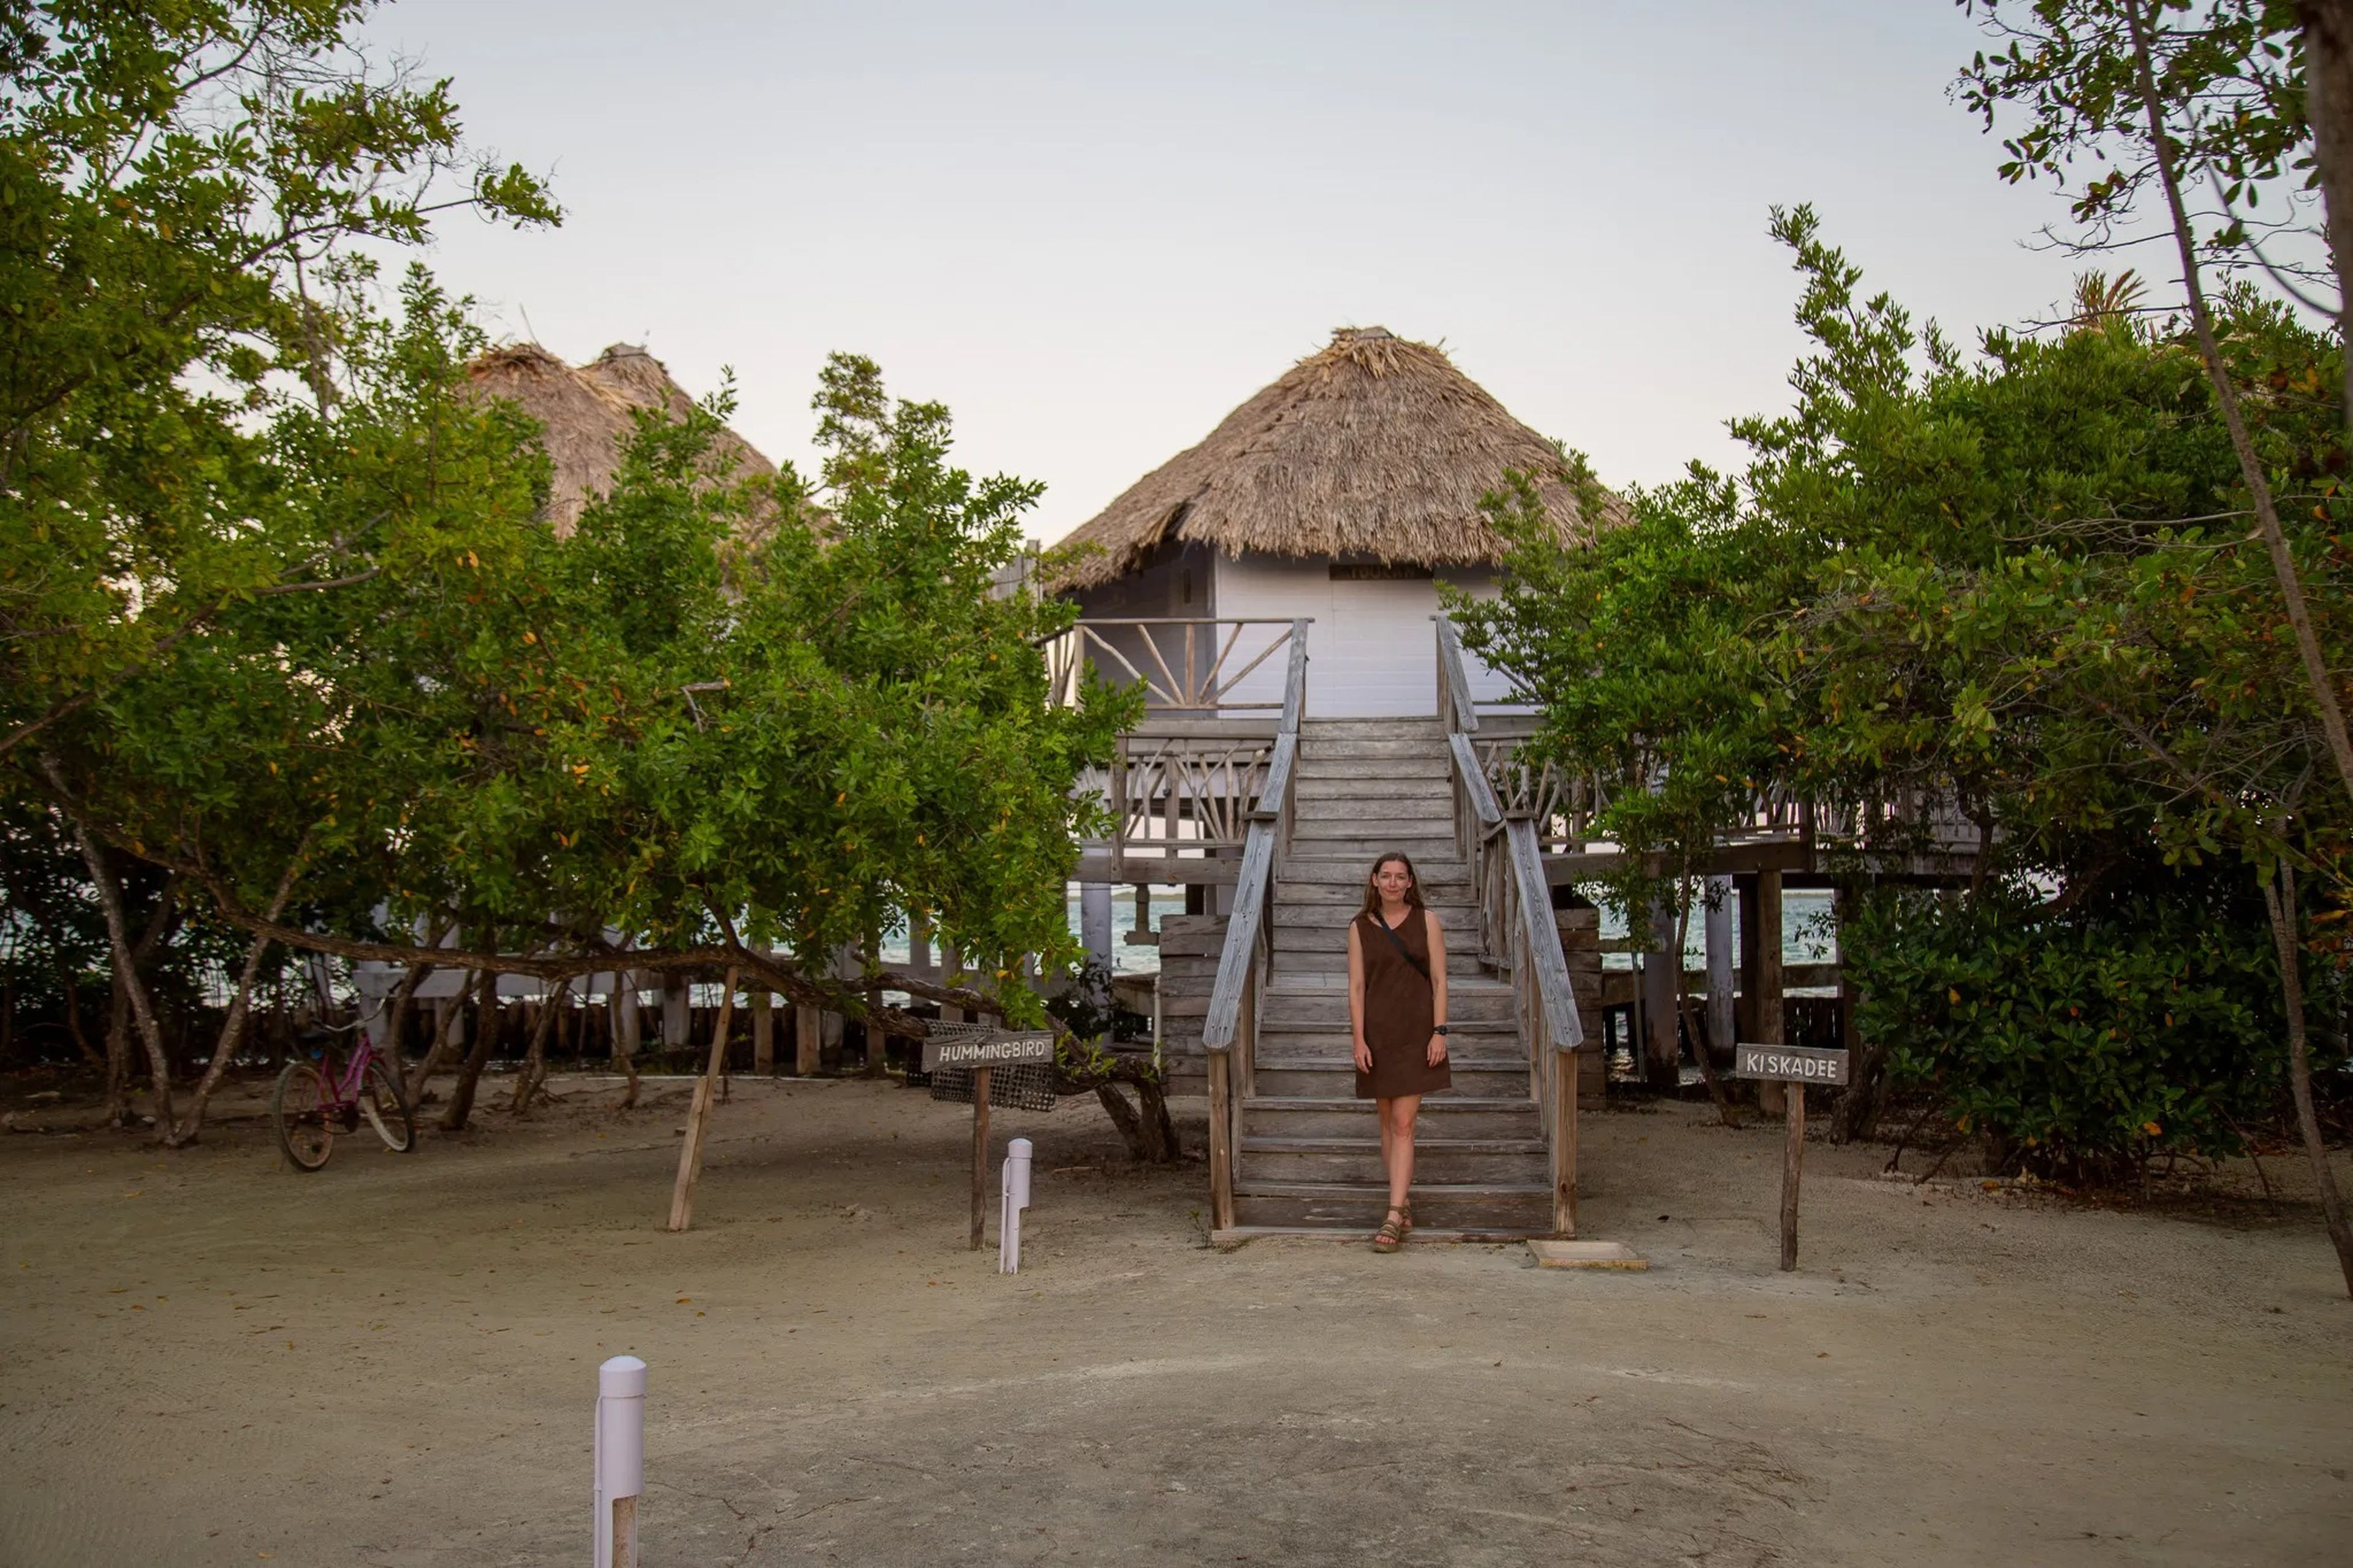 The author stands in front of bungalows at the Thatch Caye resort in Belize.